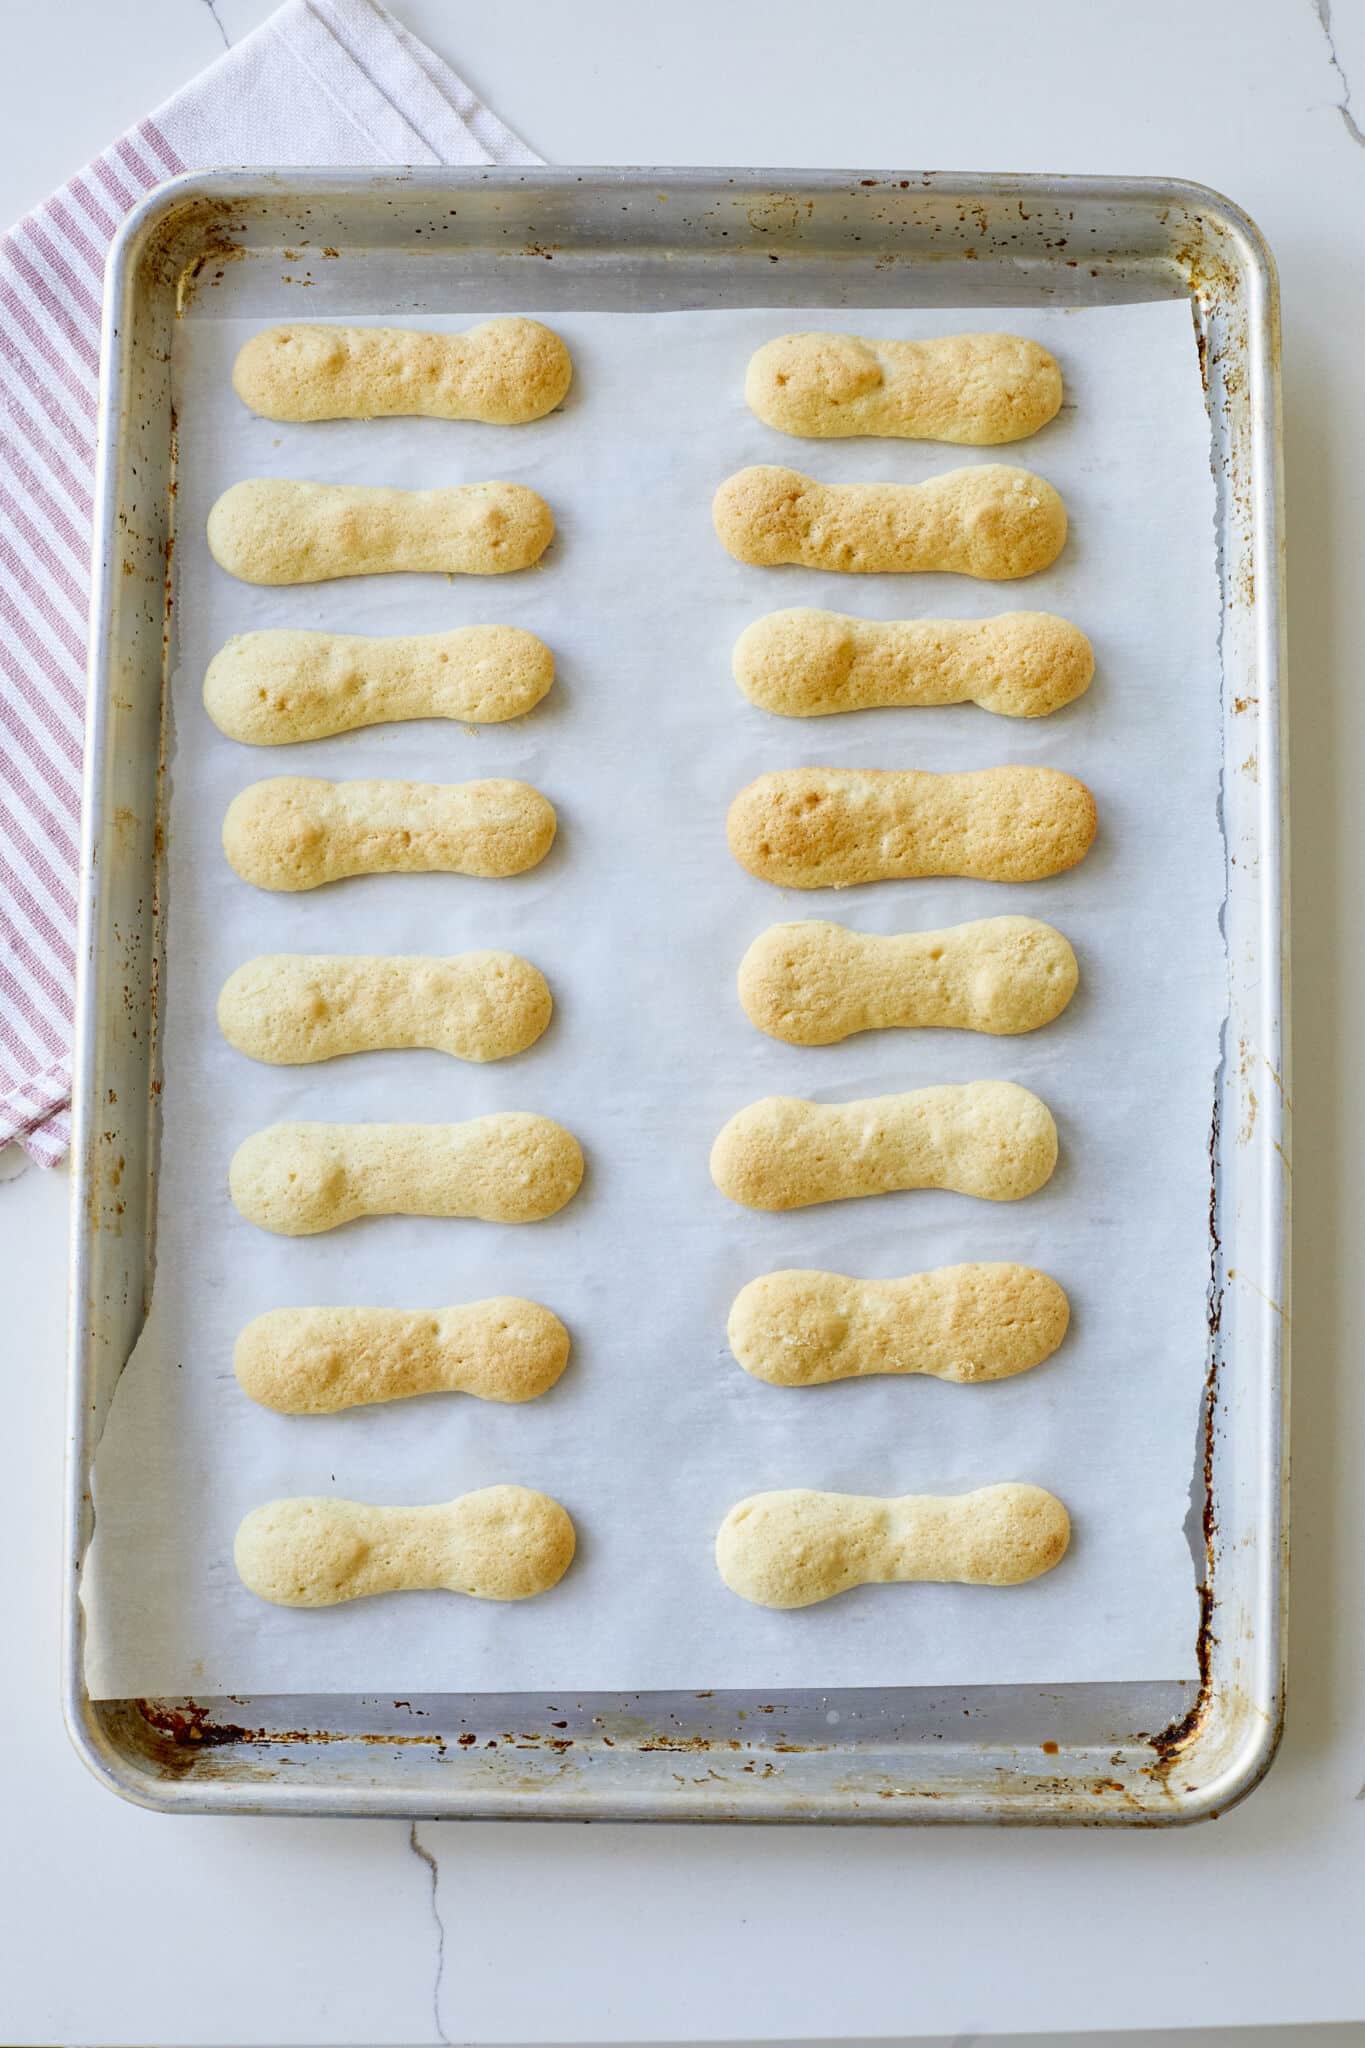 Baked homemade ladyfingers on a tray 